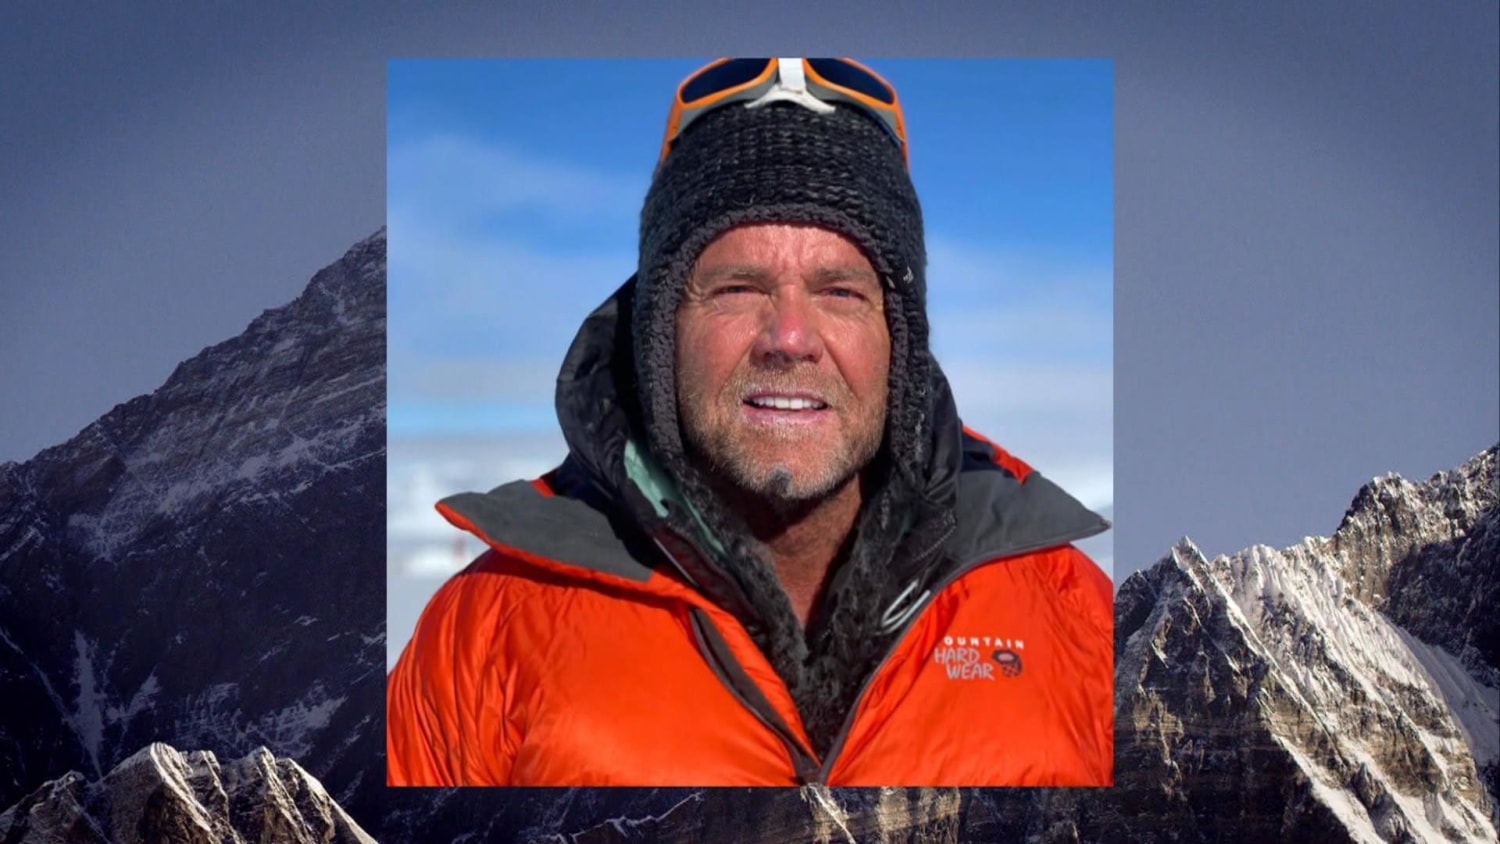 Utah man dies Everest after reaching goal of climbing each continent's tallest mountain, family says